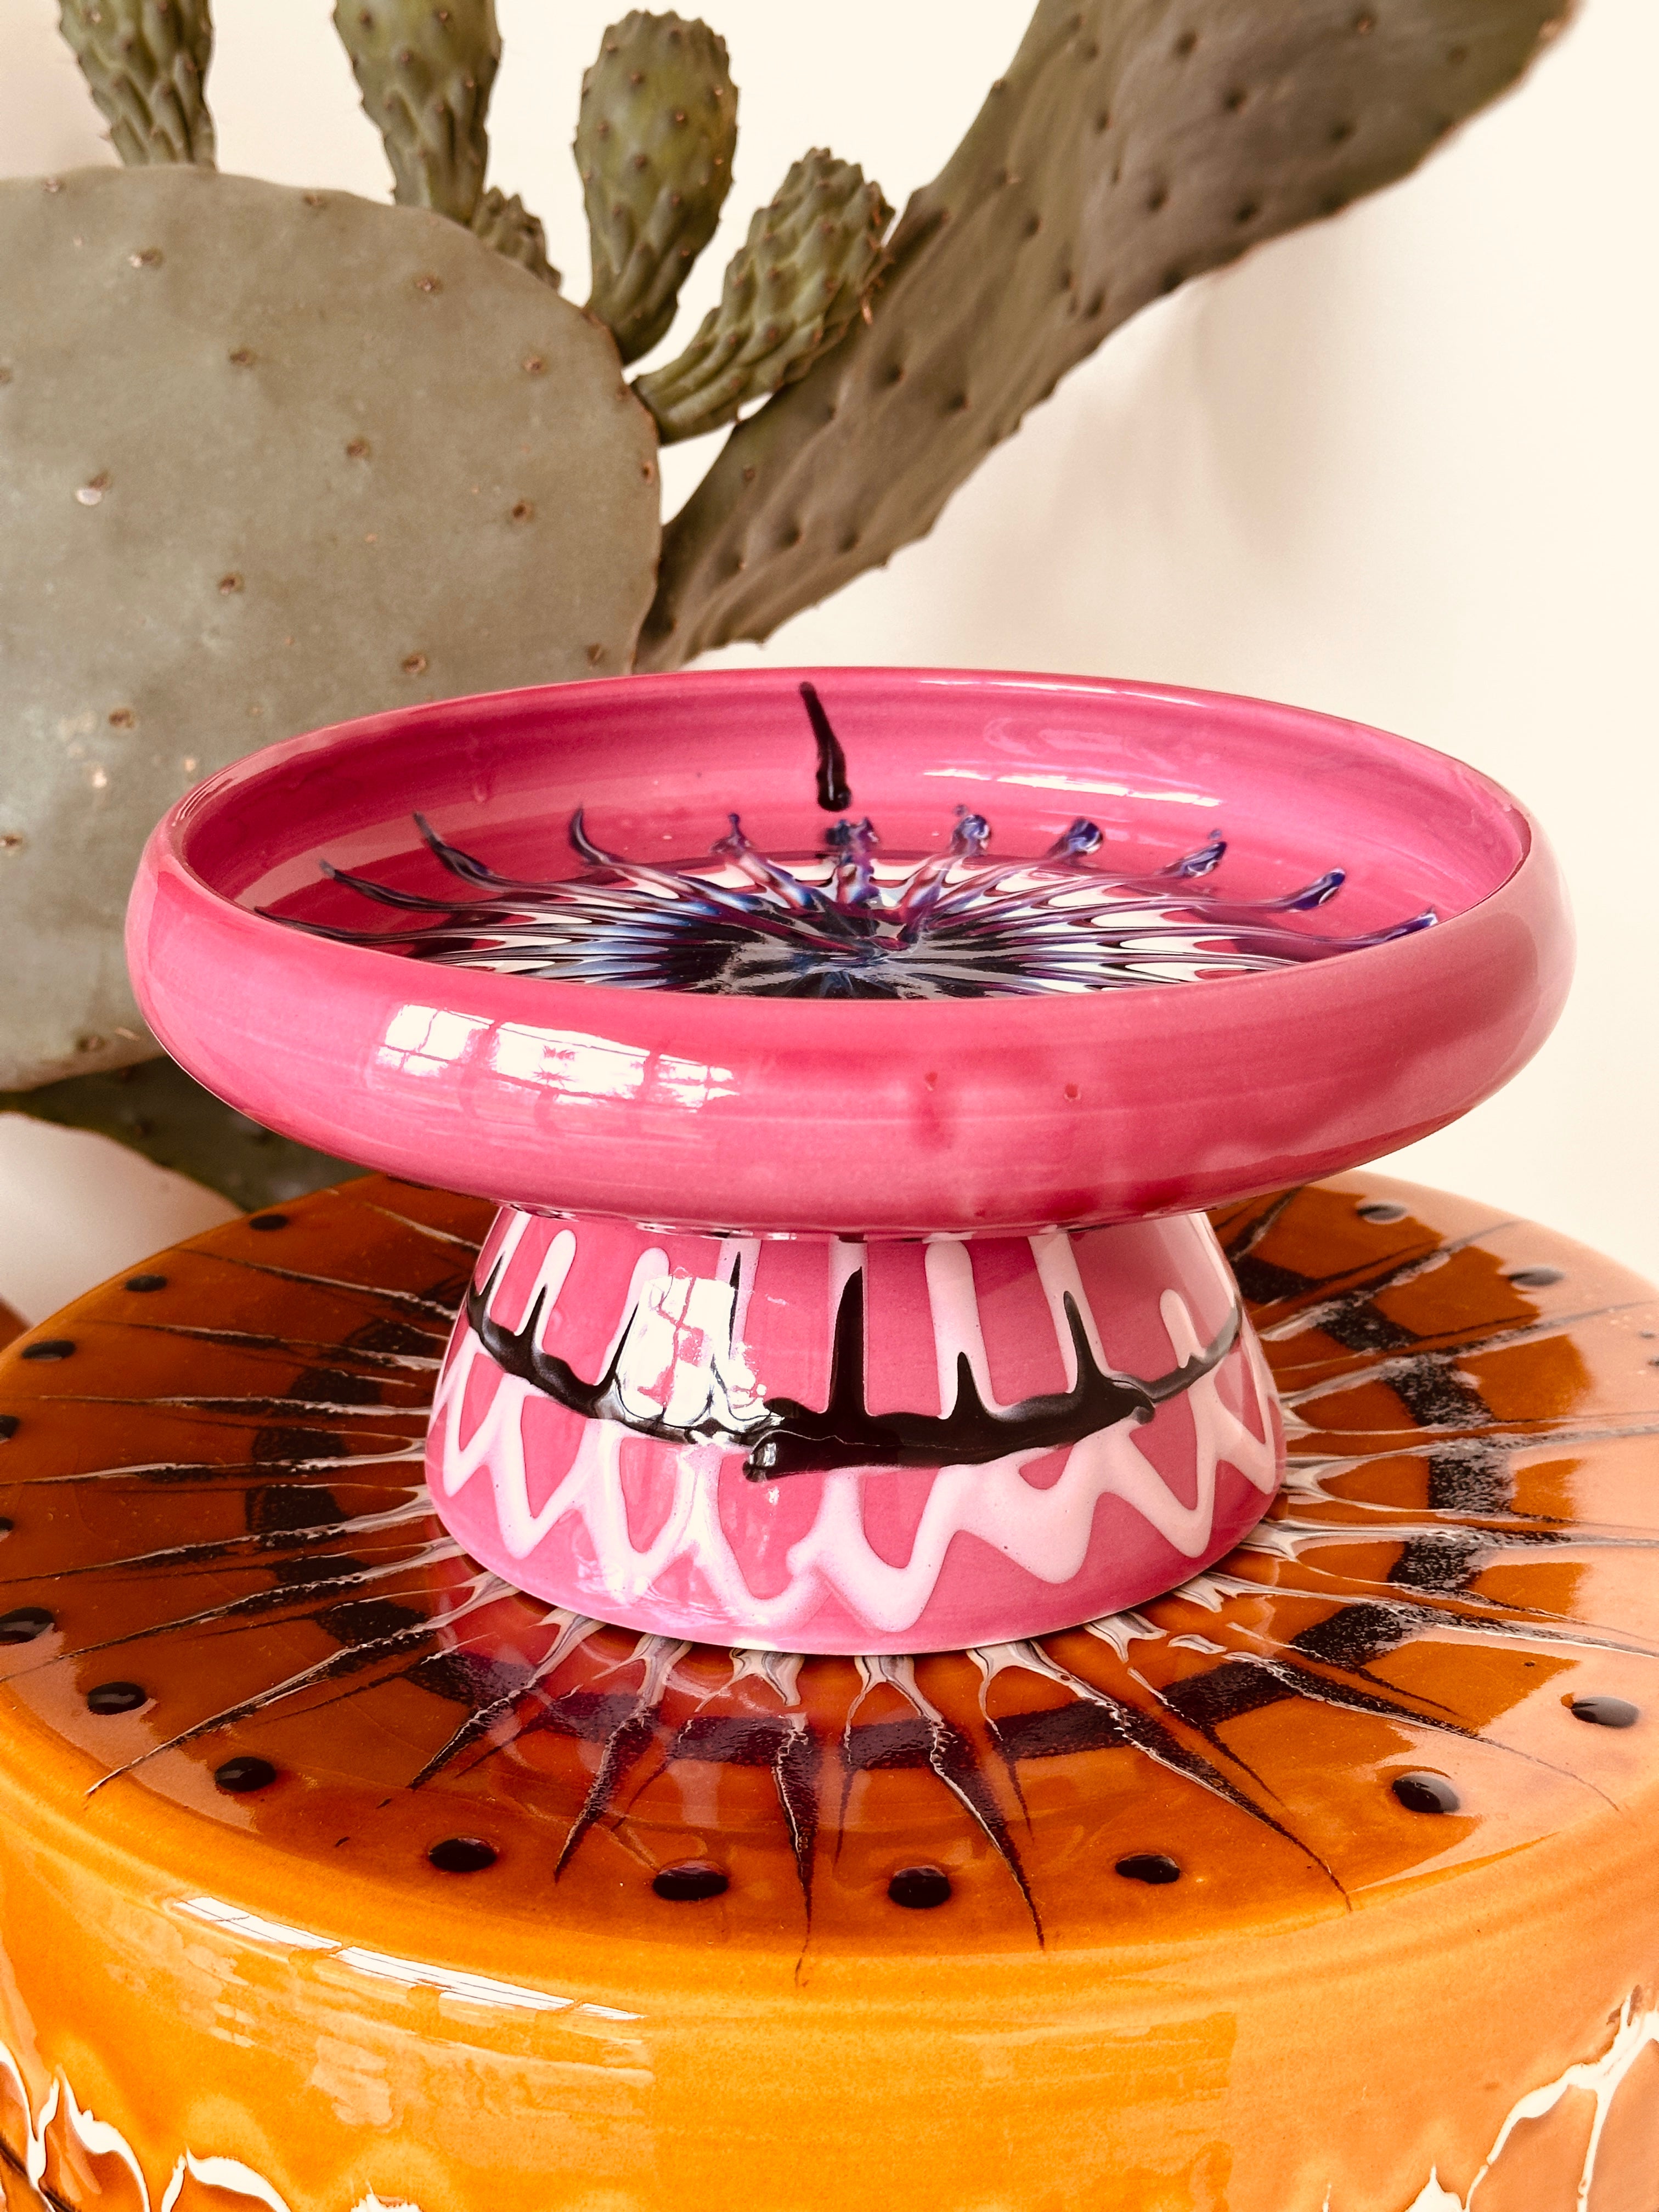 Psychodelic Frisbee High Plate "Riviera 1964 Fuxia“